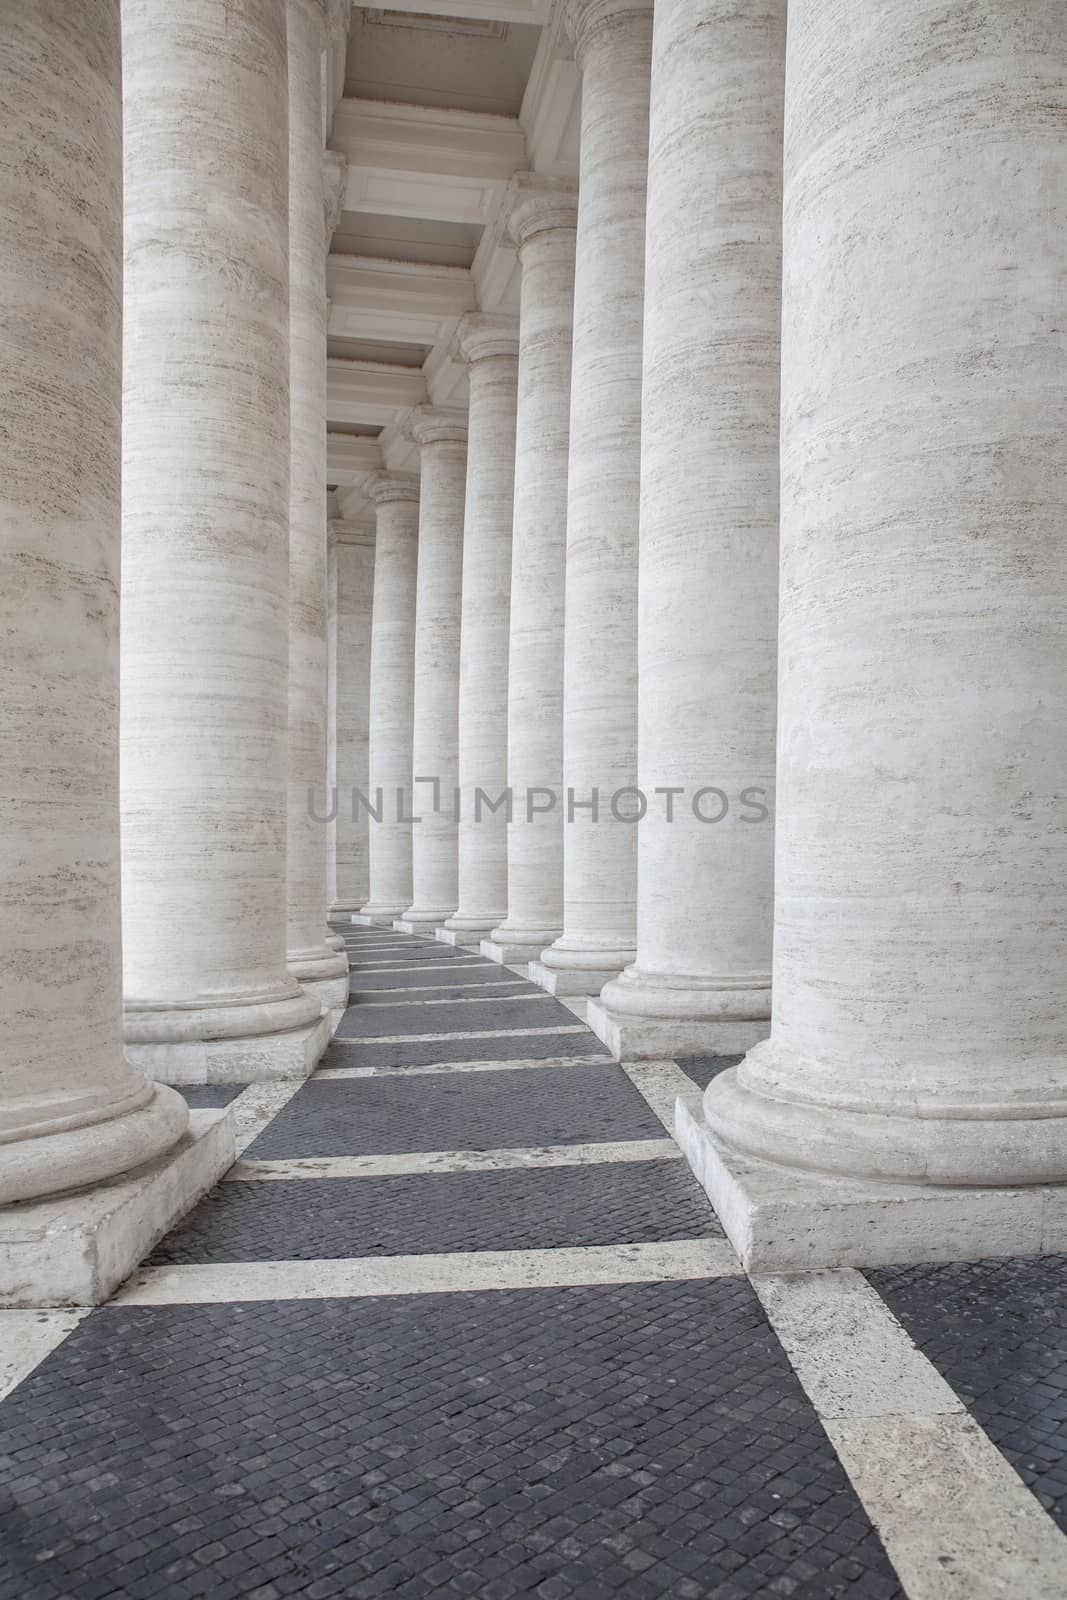 perspective of pole structure in vatican rome italy